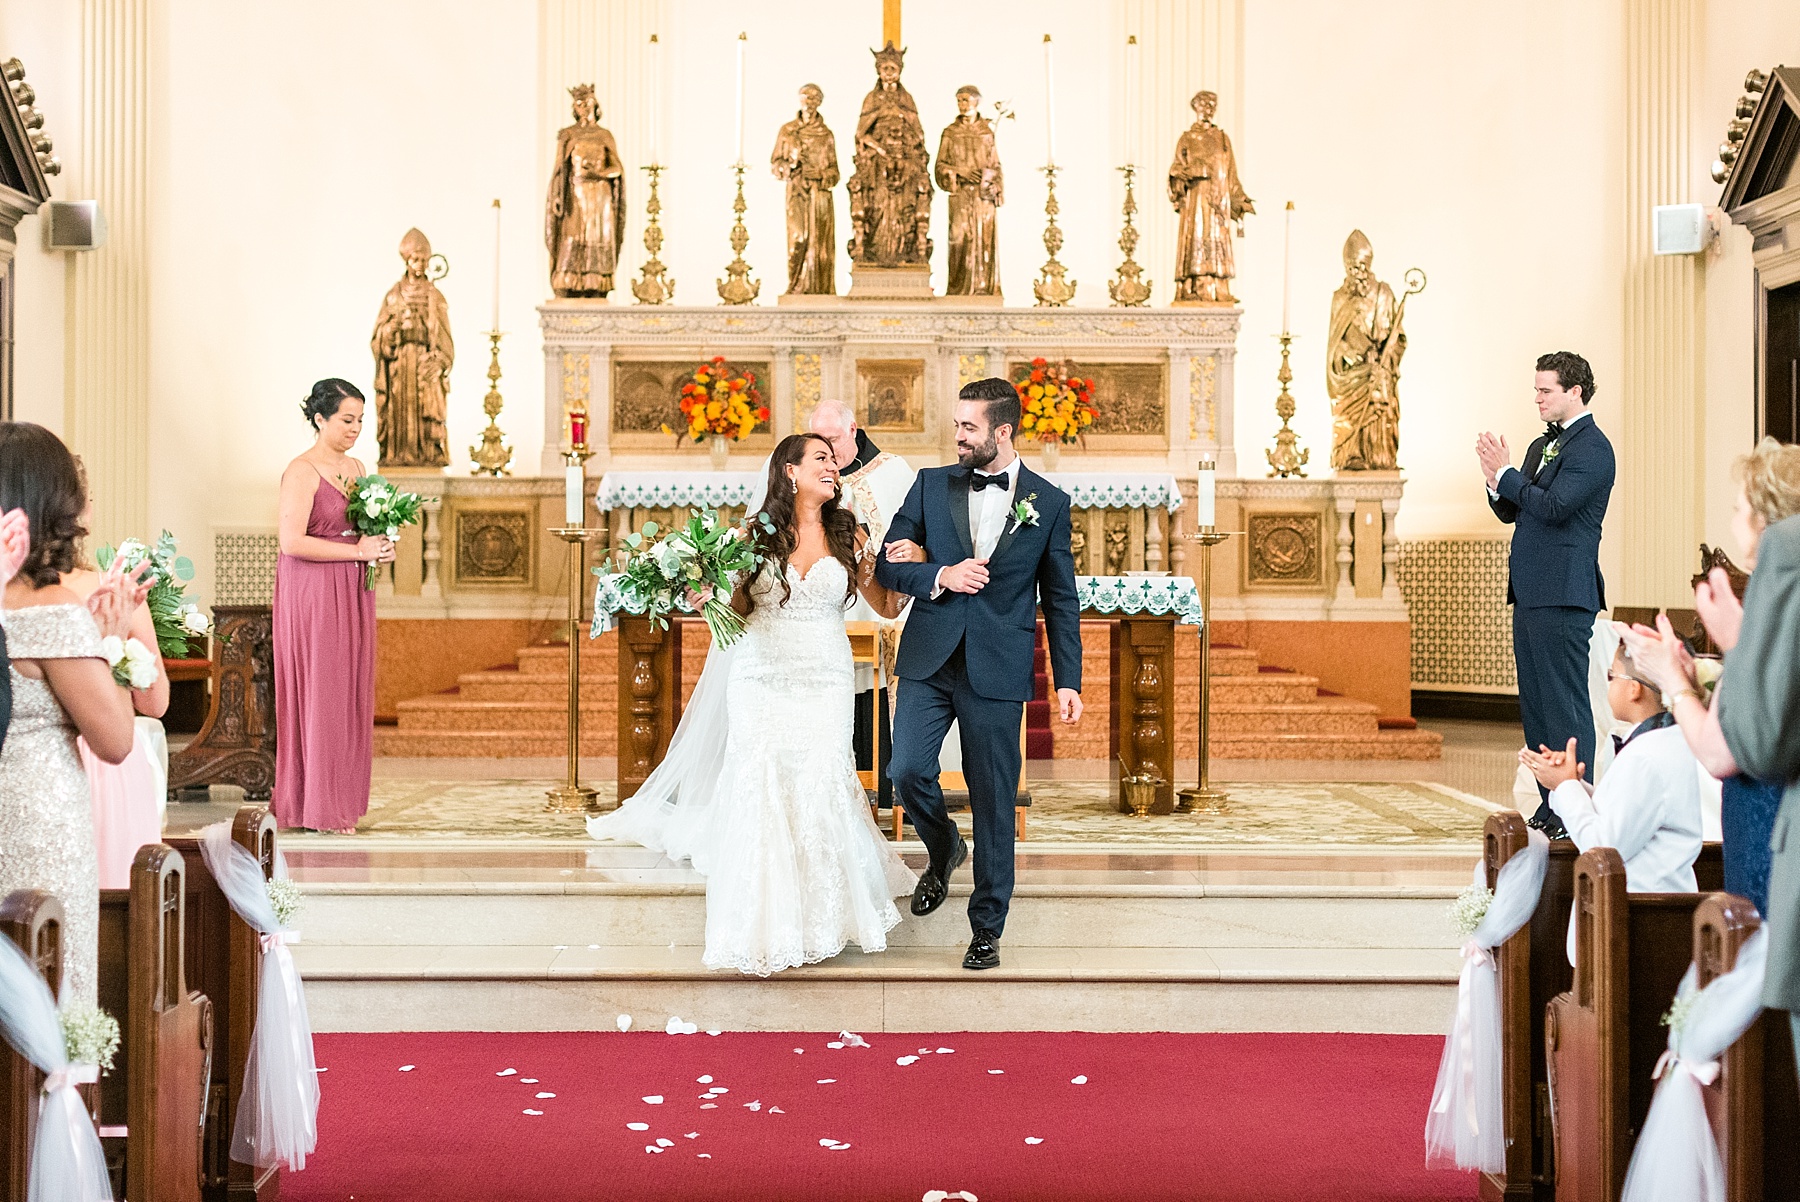 traditional wedding ceremony in Maryland photographed by Alexandra Mandato Photography